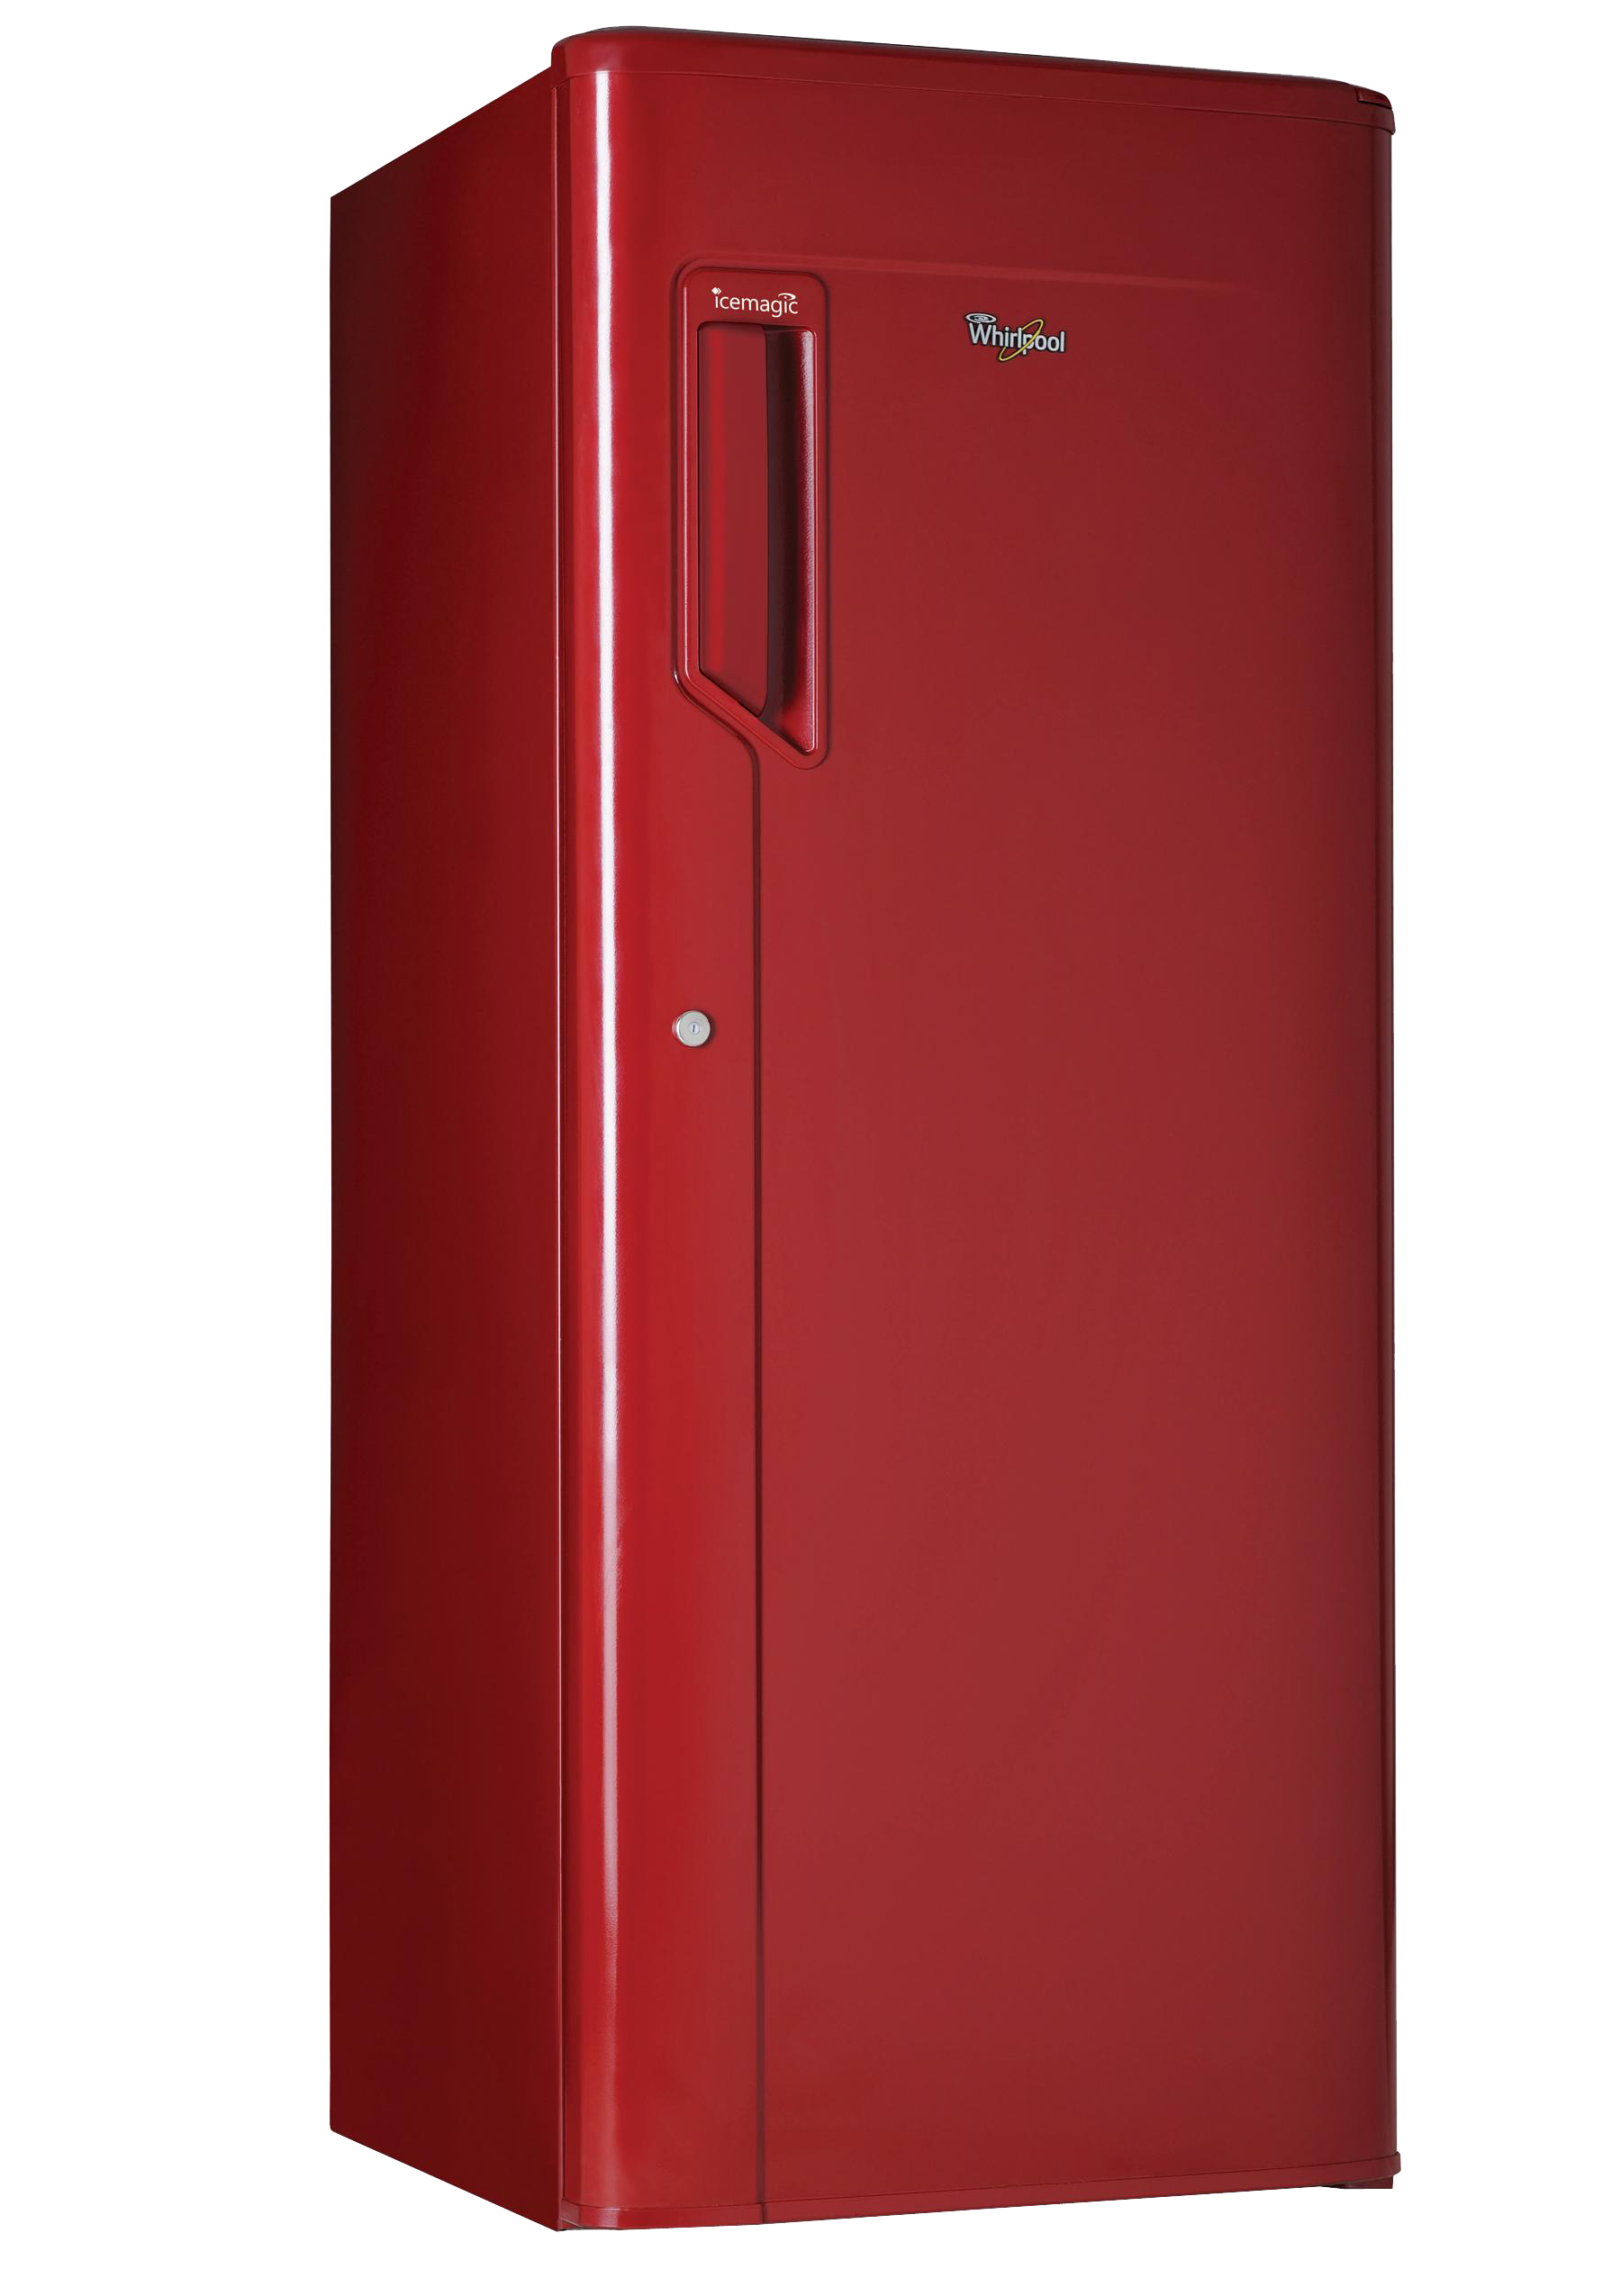 free clipart images refrigerator - photo #45